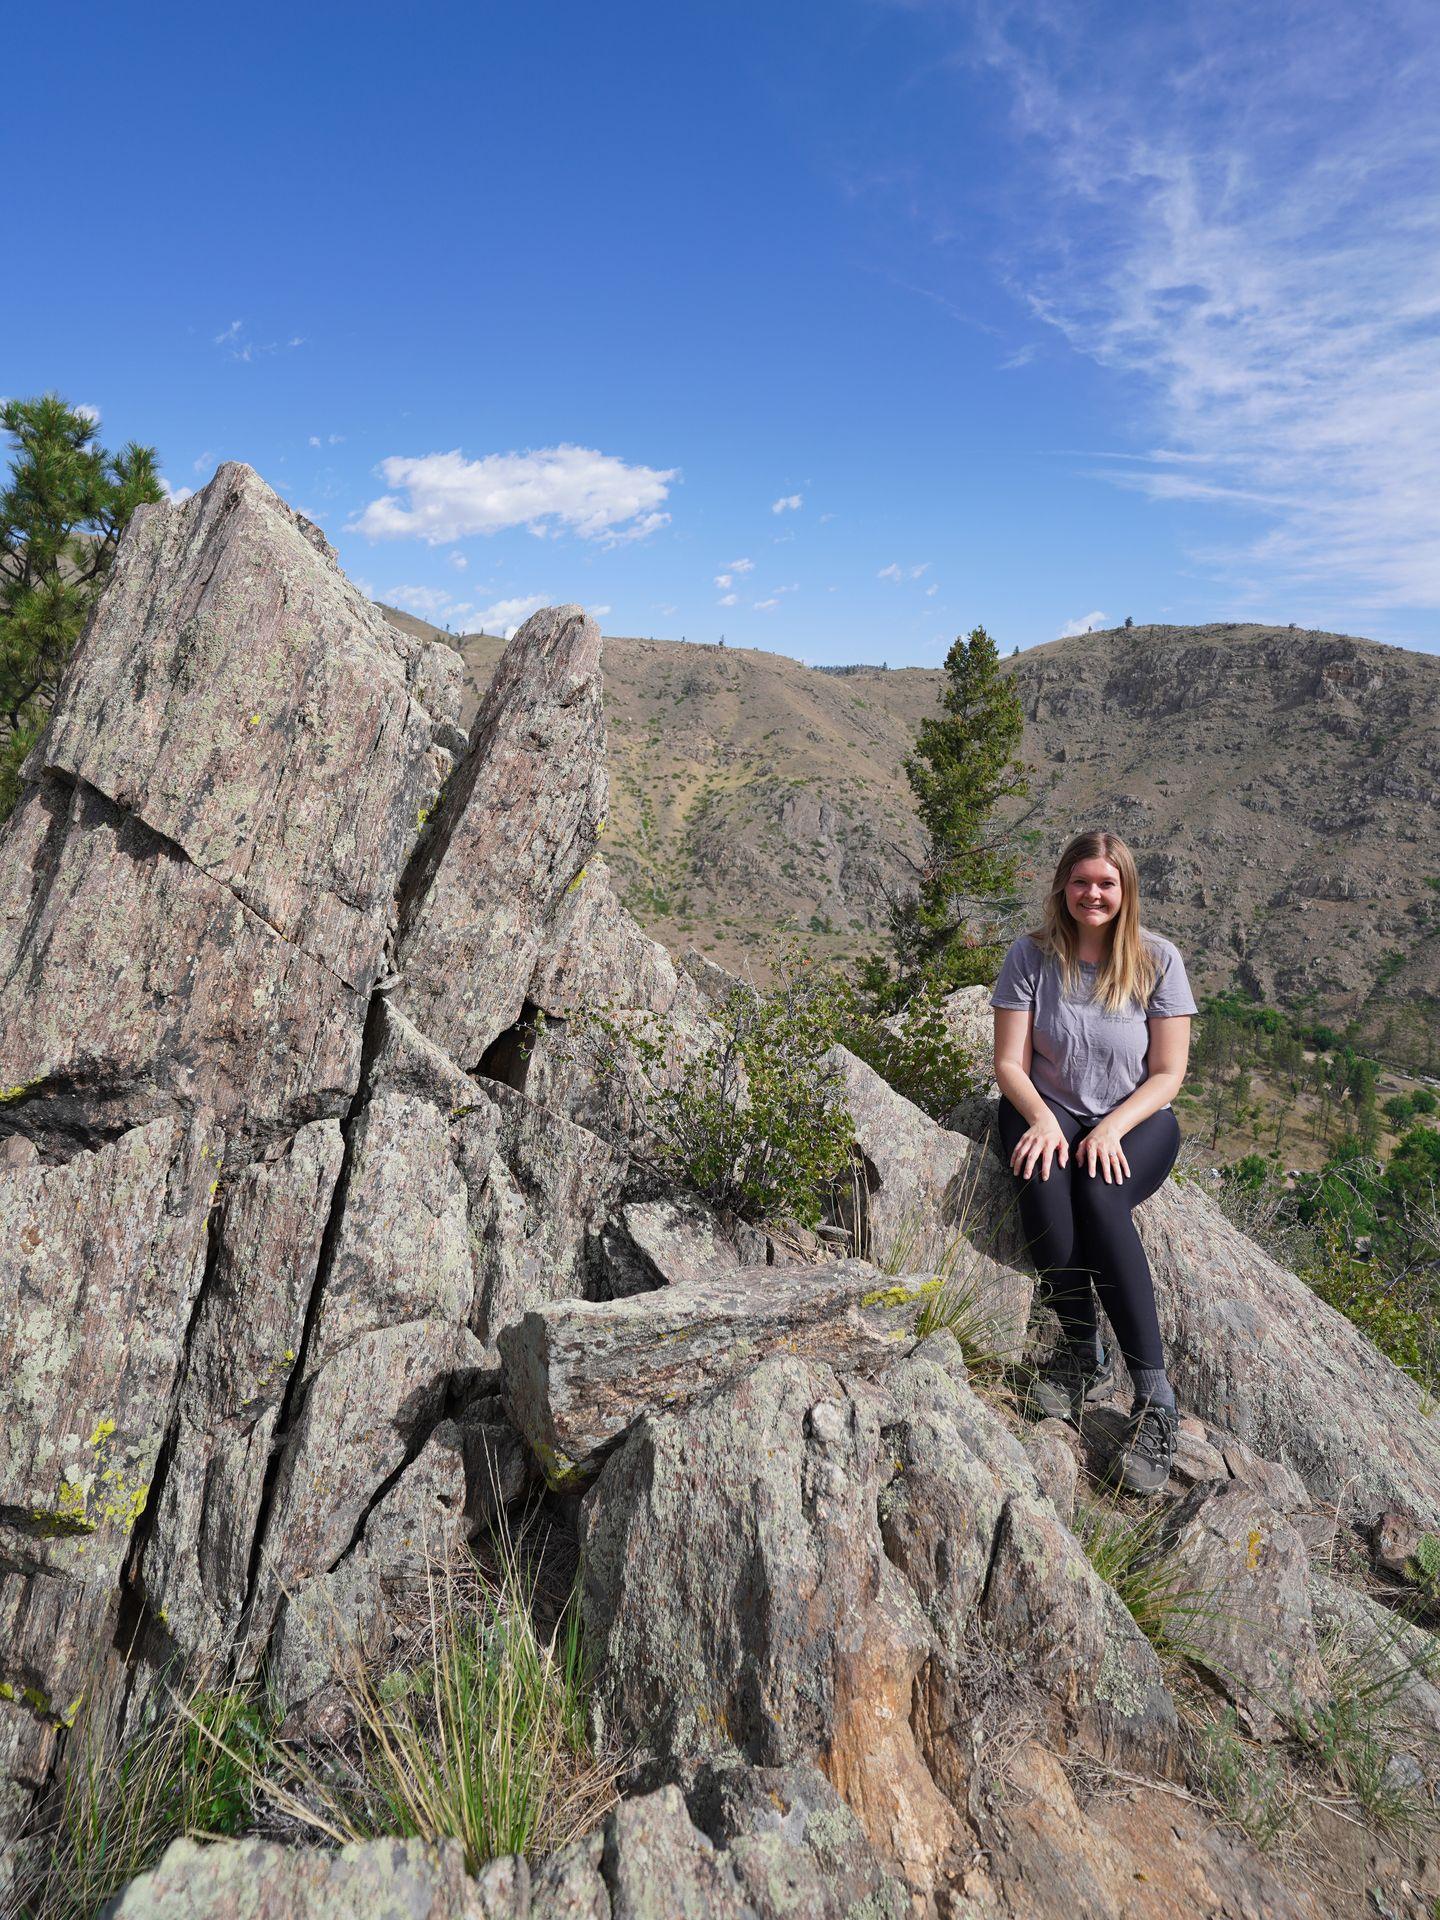 Lydia sitting on an area of black, jagged rocks along the Black Powder Trail in the Gateway Natural Area.